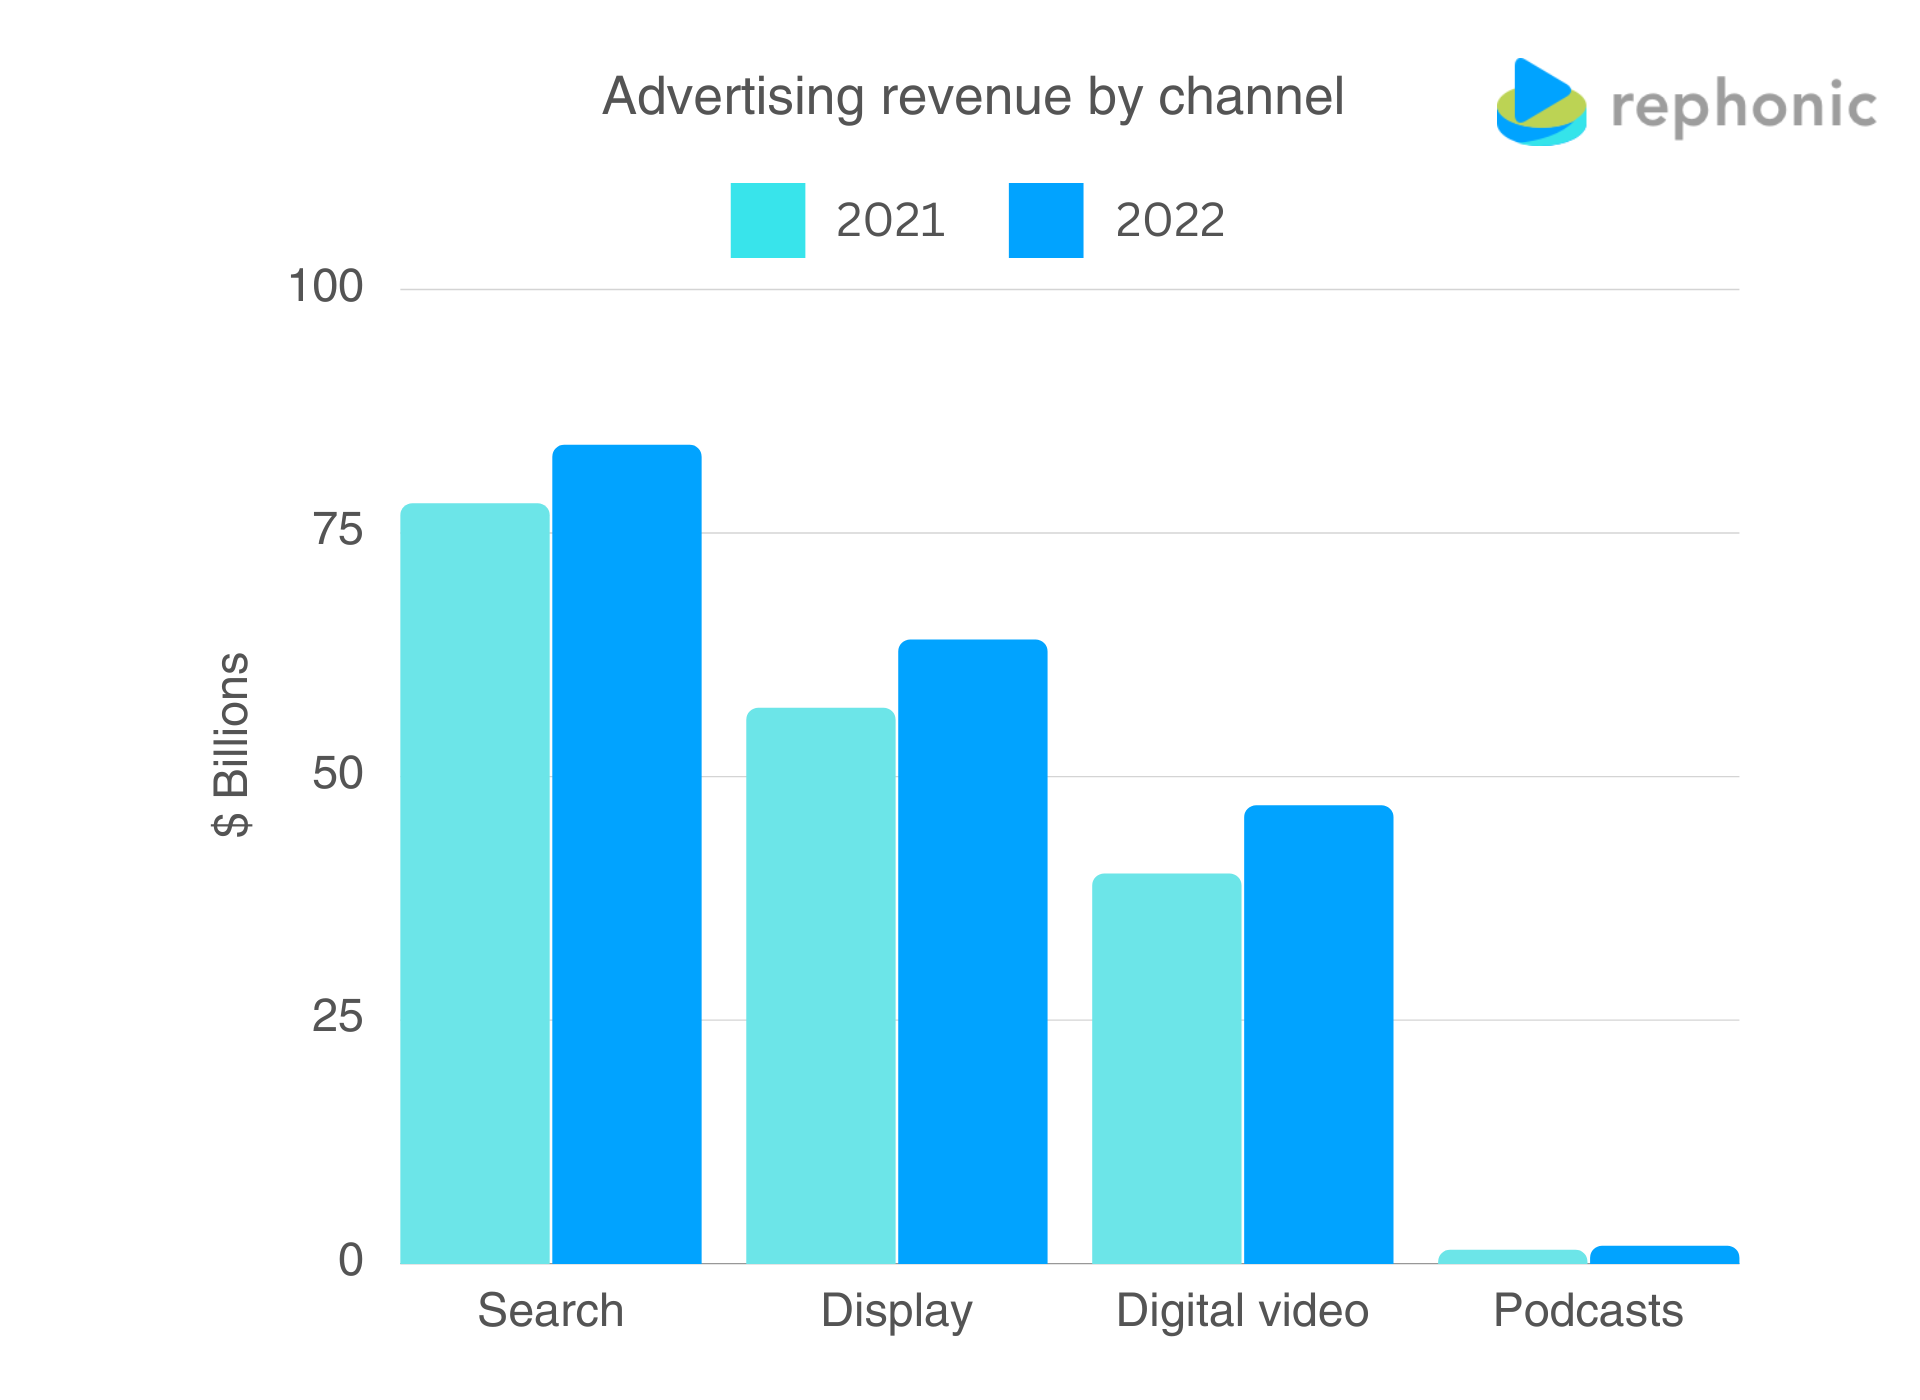 US advertising revenue by channel